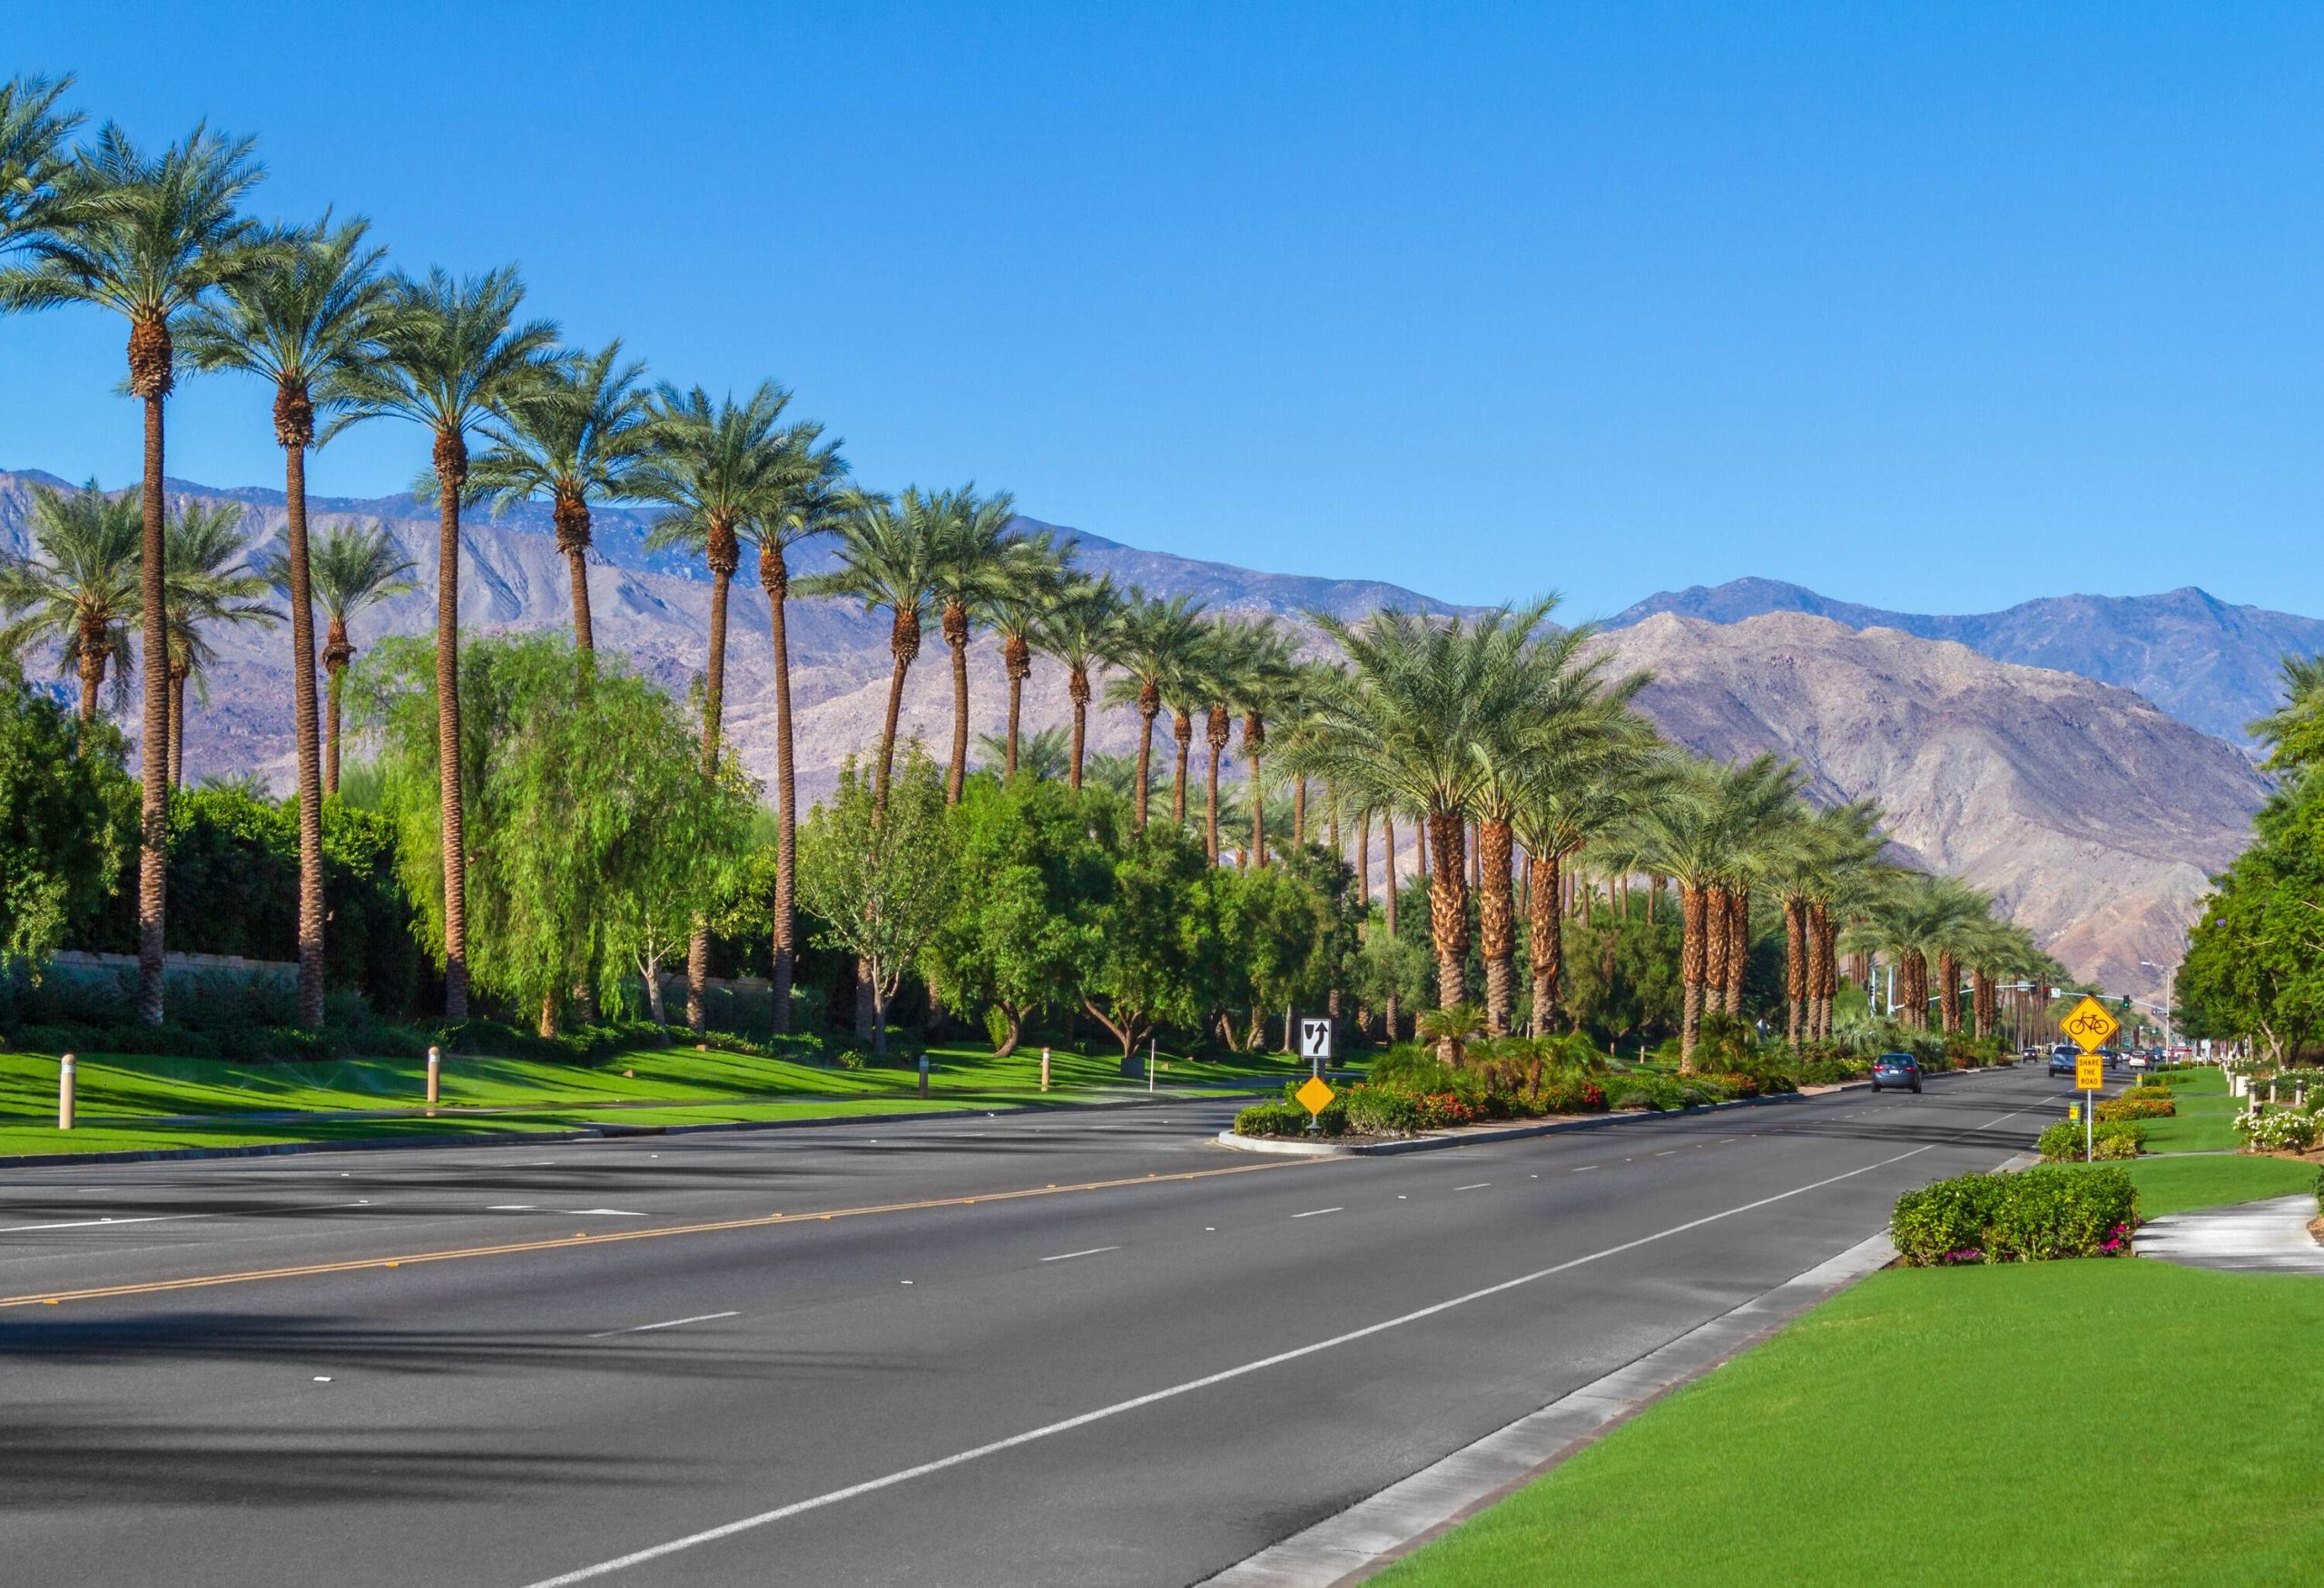 A landscaped roadway bordered by green lawns and towering palm trees.